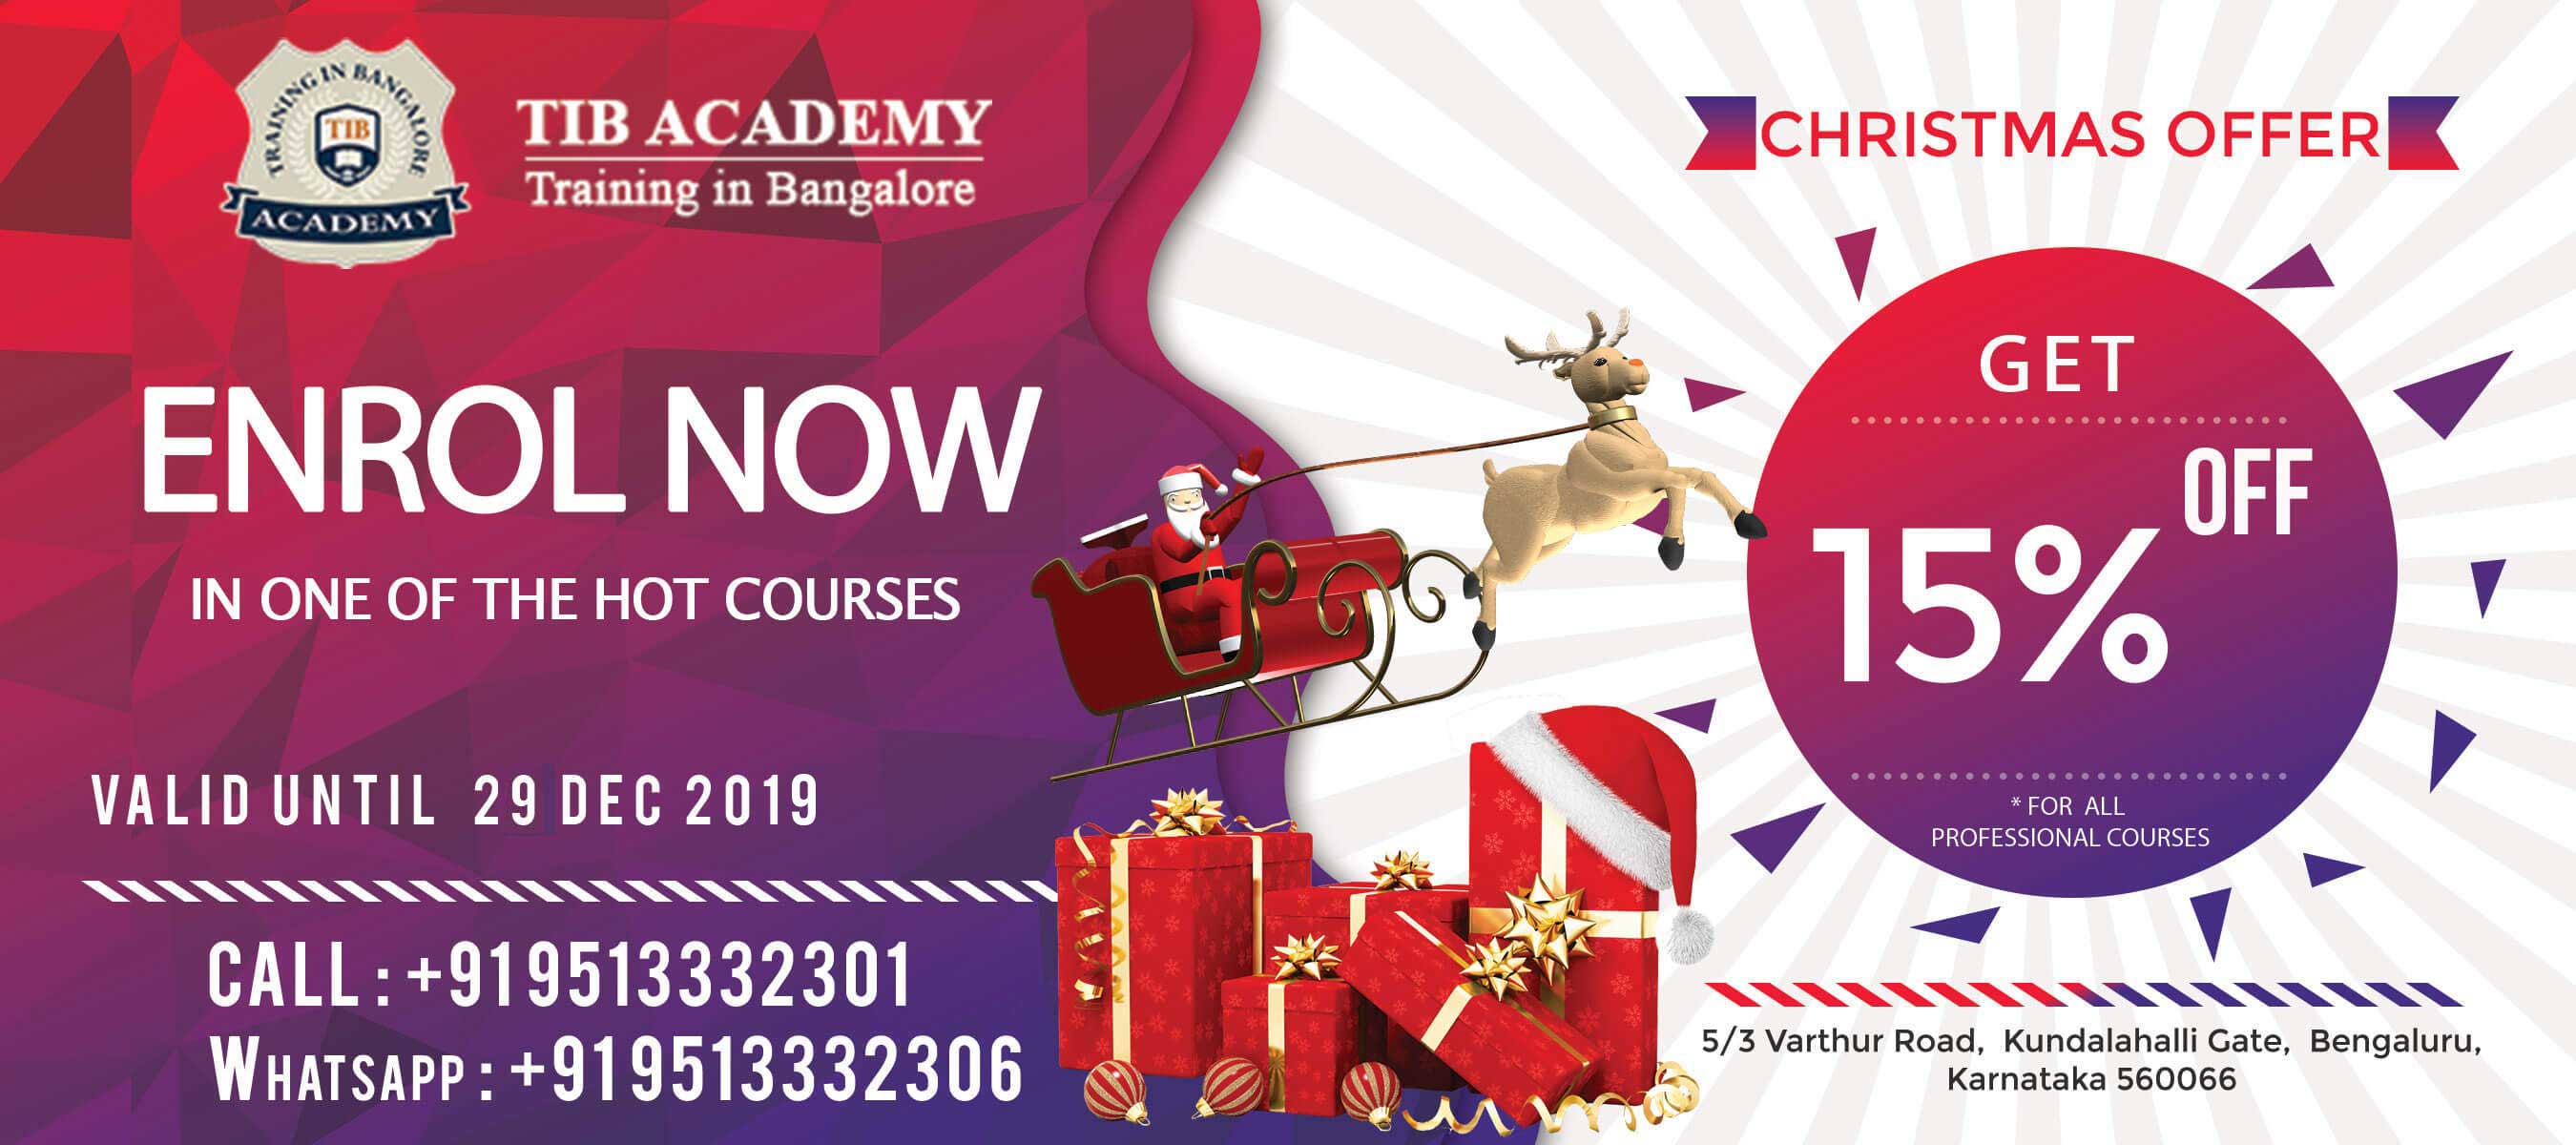 Training in Bangalore - Christmas Offers 2019